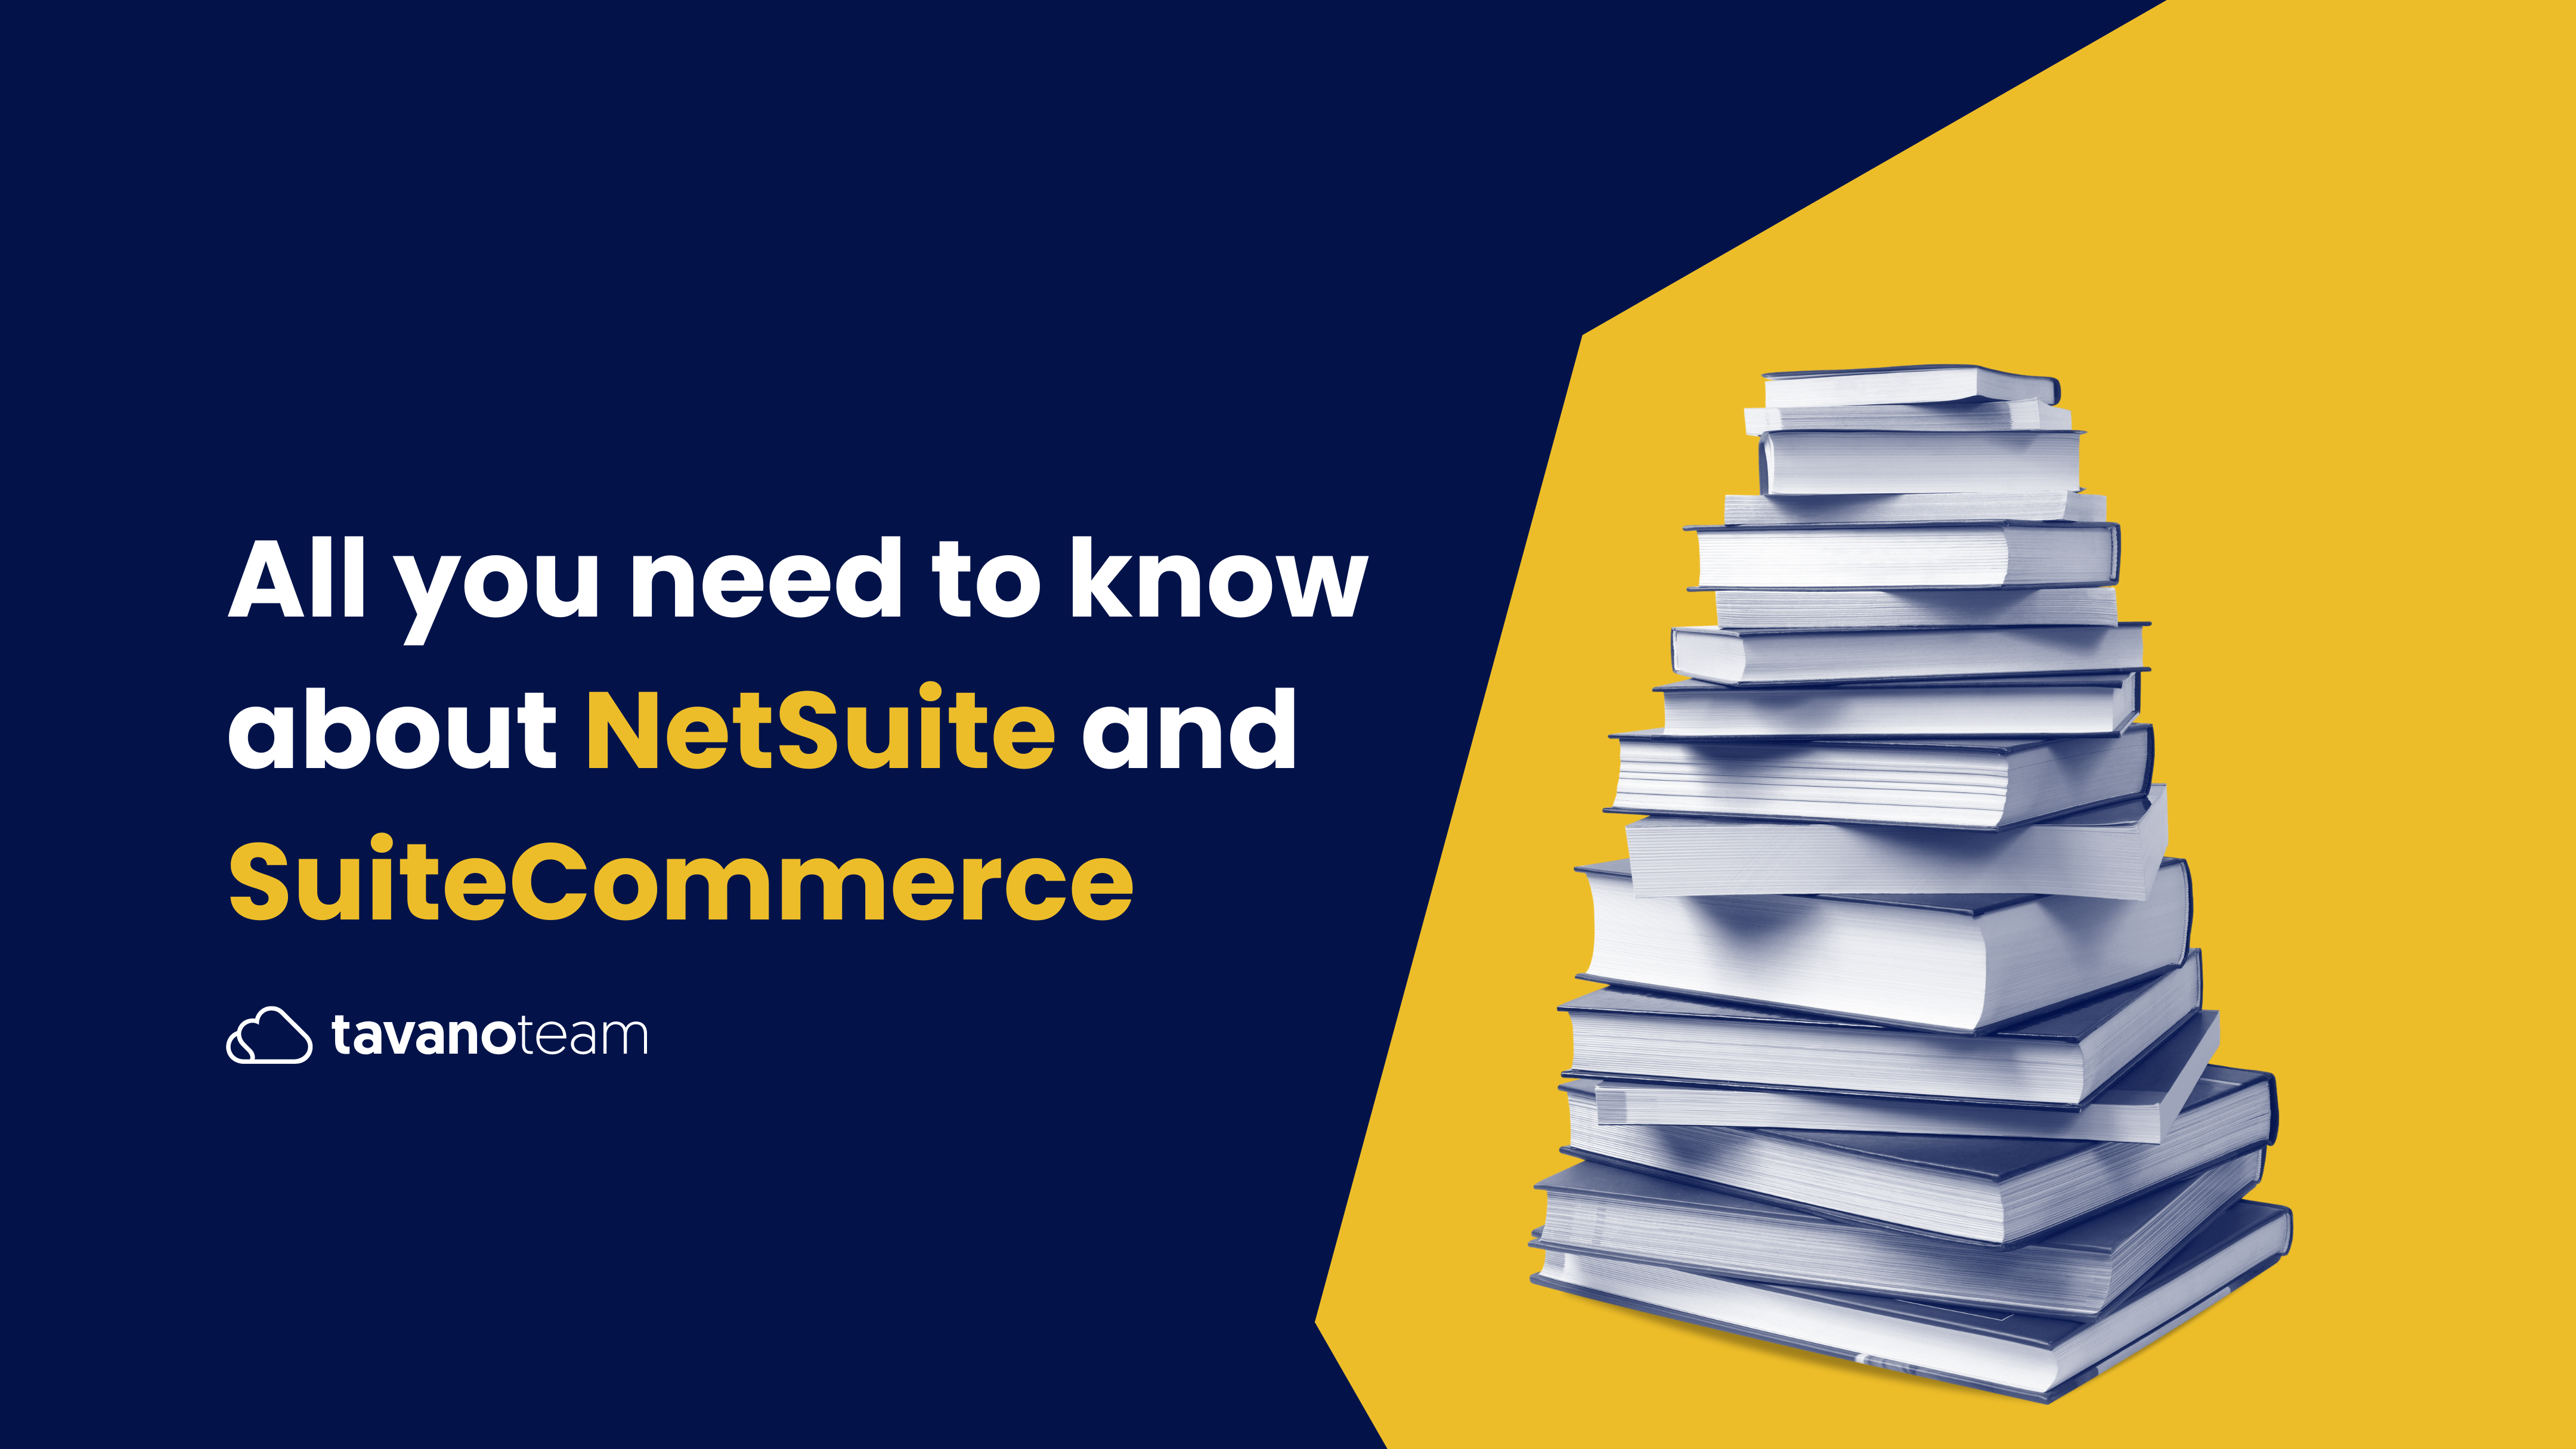 All-you-need-to-know-about-NetSuite-And-SuiteCommerce